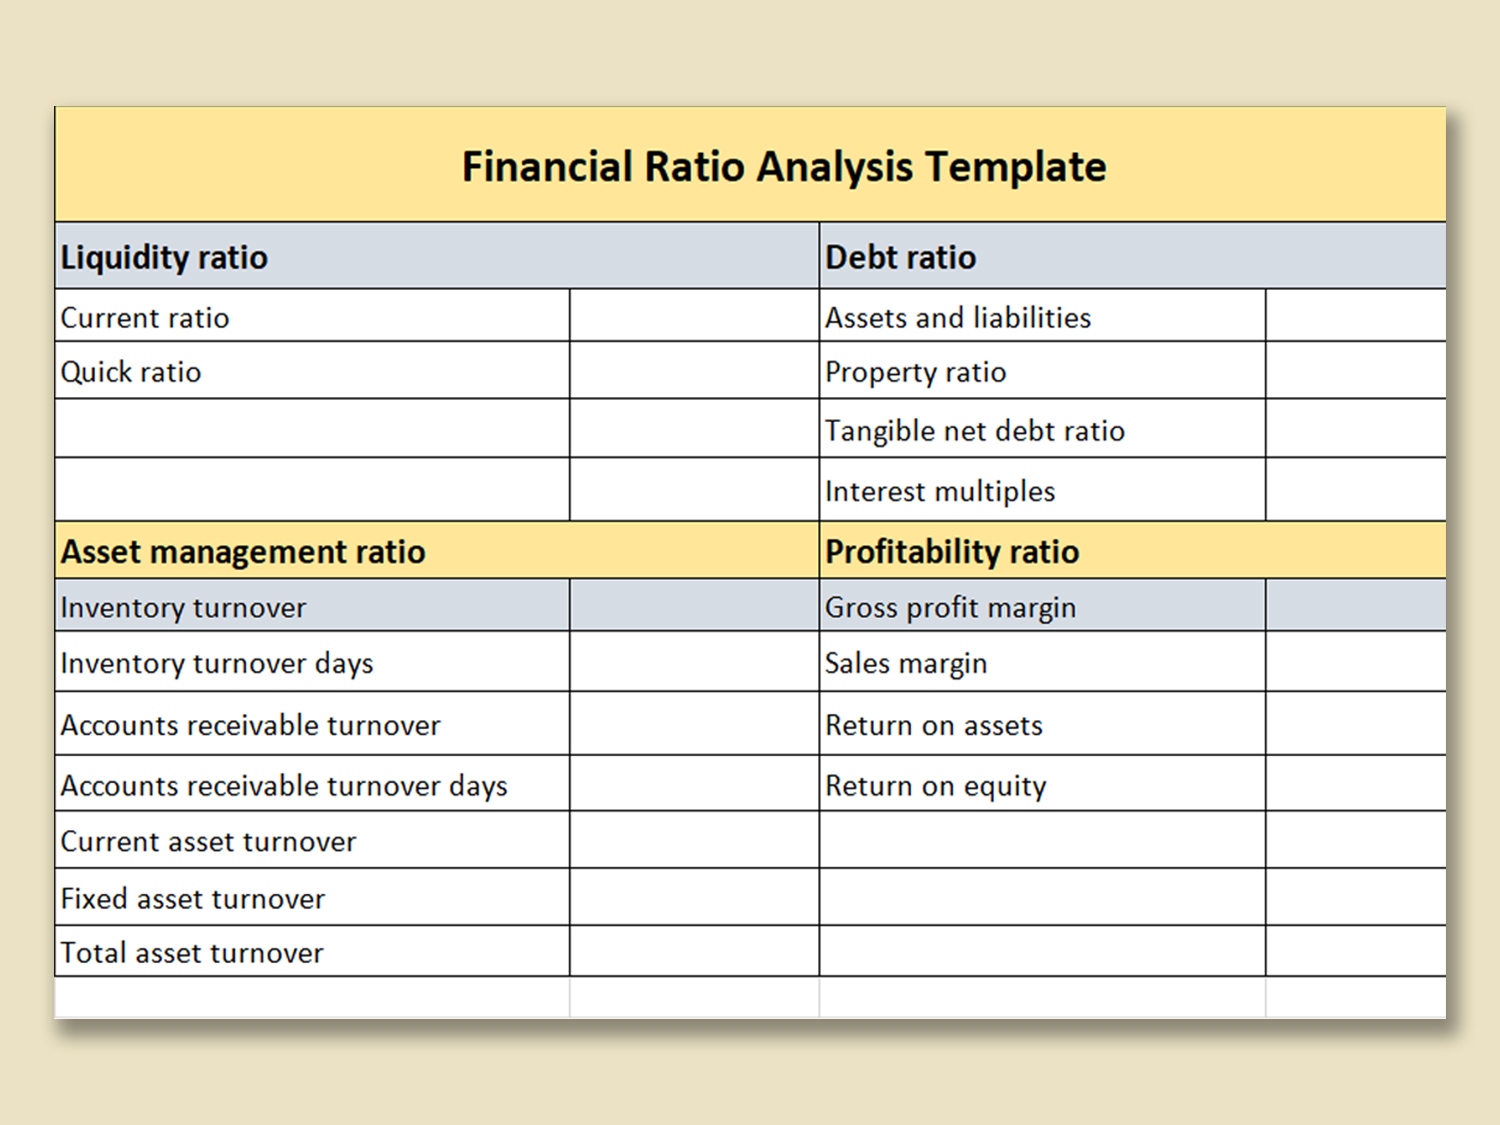 WPS Template - Free Download Writer, Presentation & Spreadsheet  For Financial Ratio Analysis Template With Financial Ratio Analysis Template